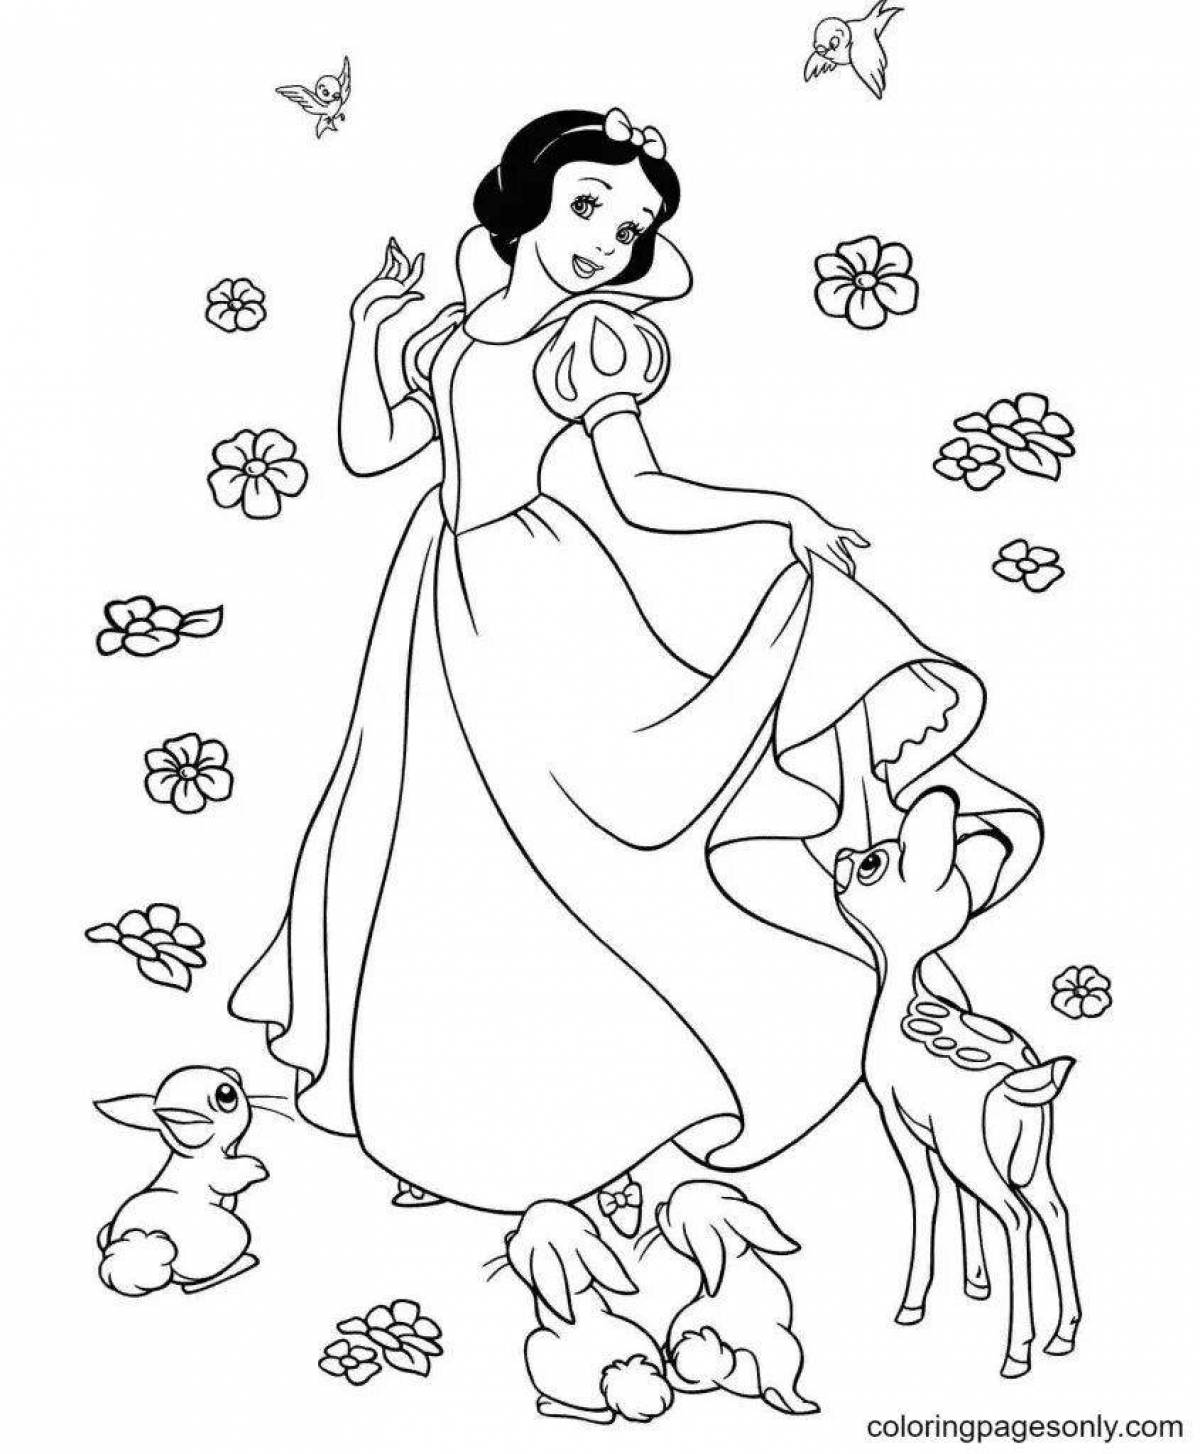 Amazing coloring book for kids with Disney princesses